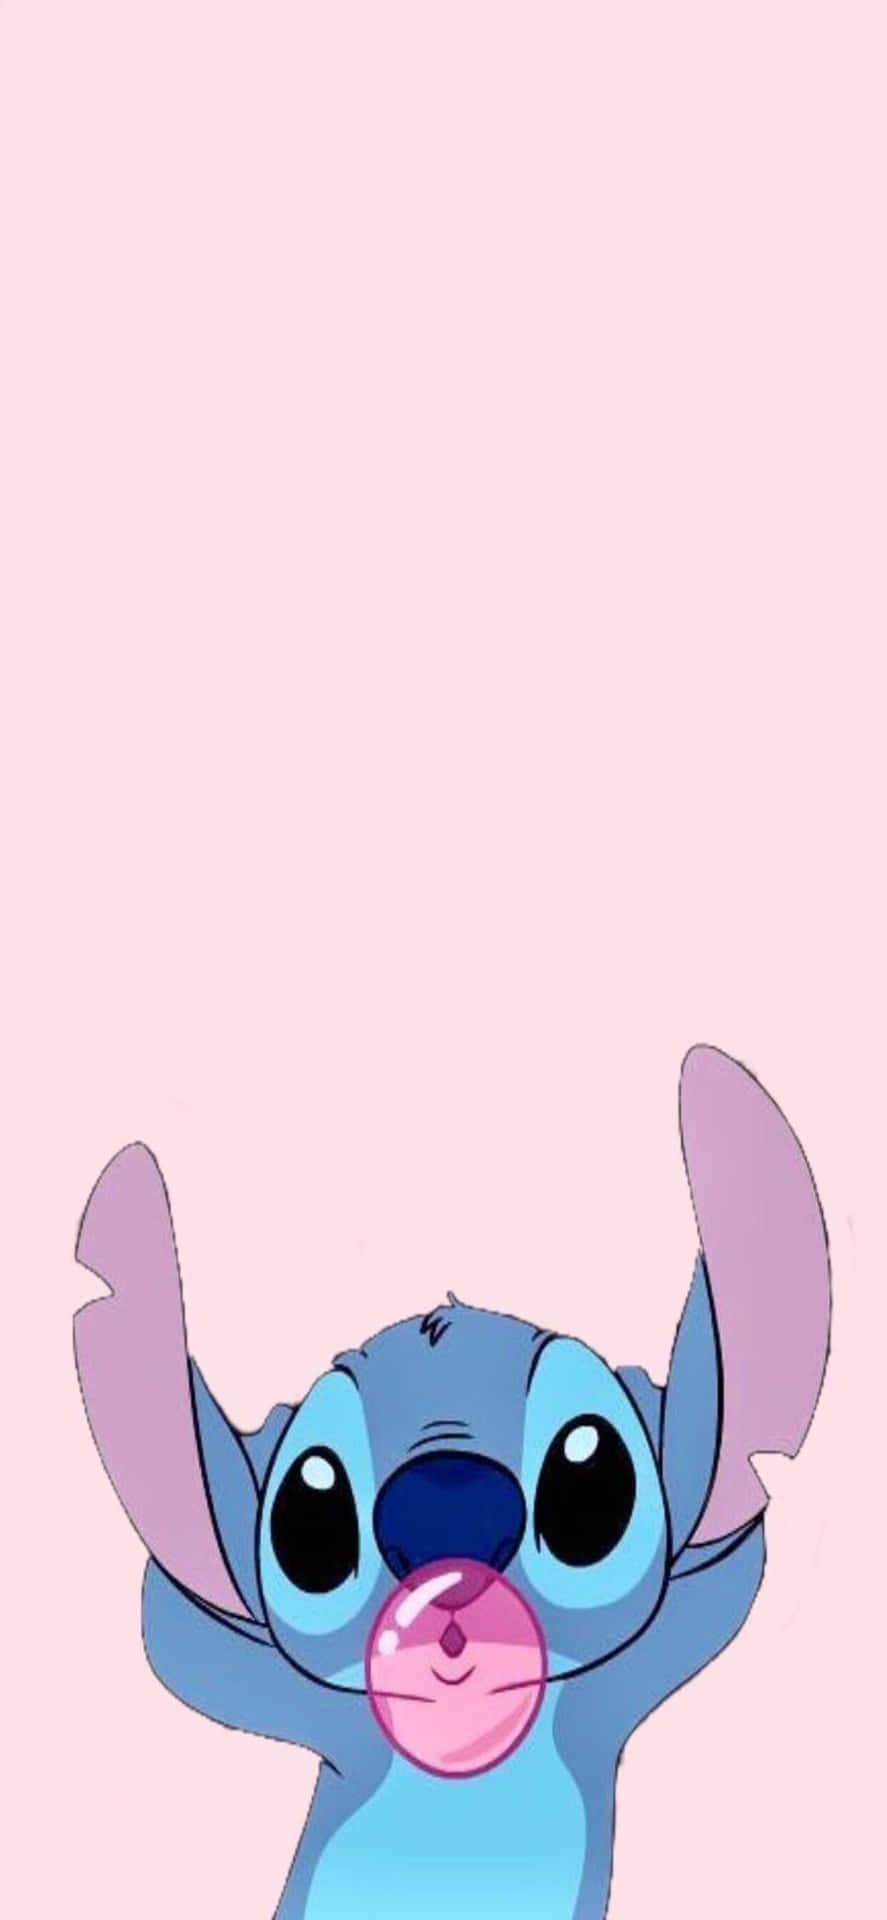 Download Stitch - Cute Wallpapers | Wallpapers.com